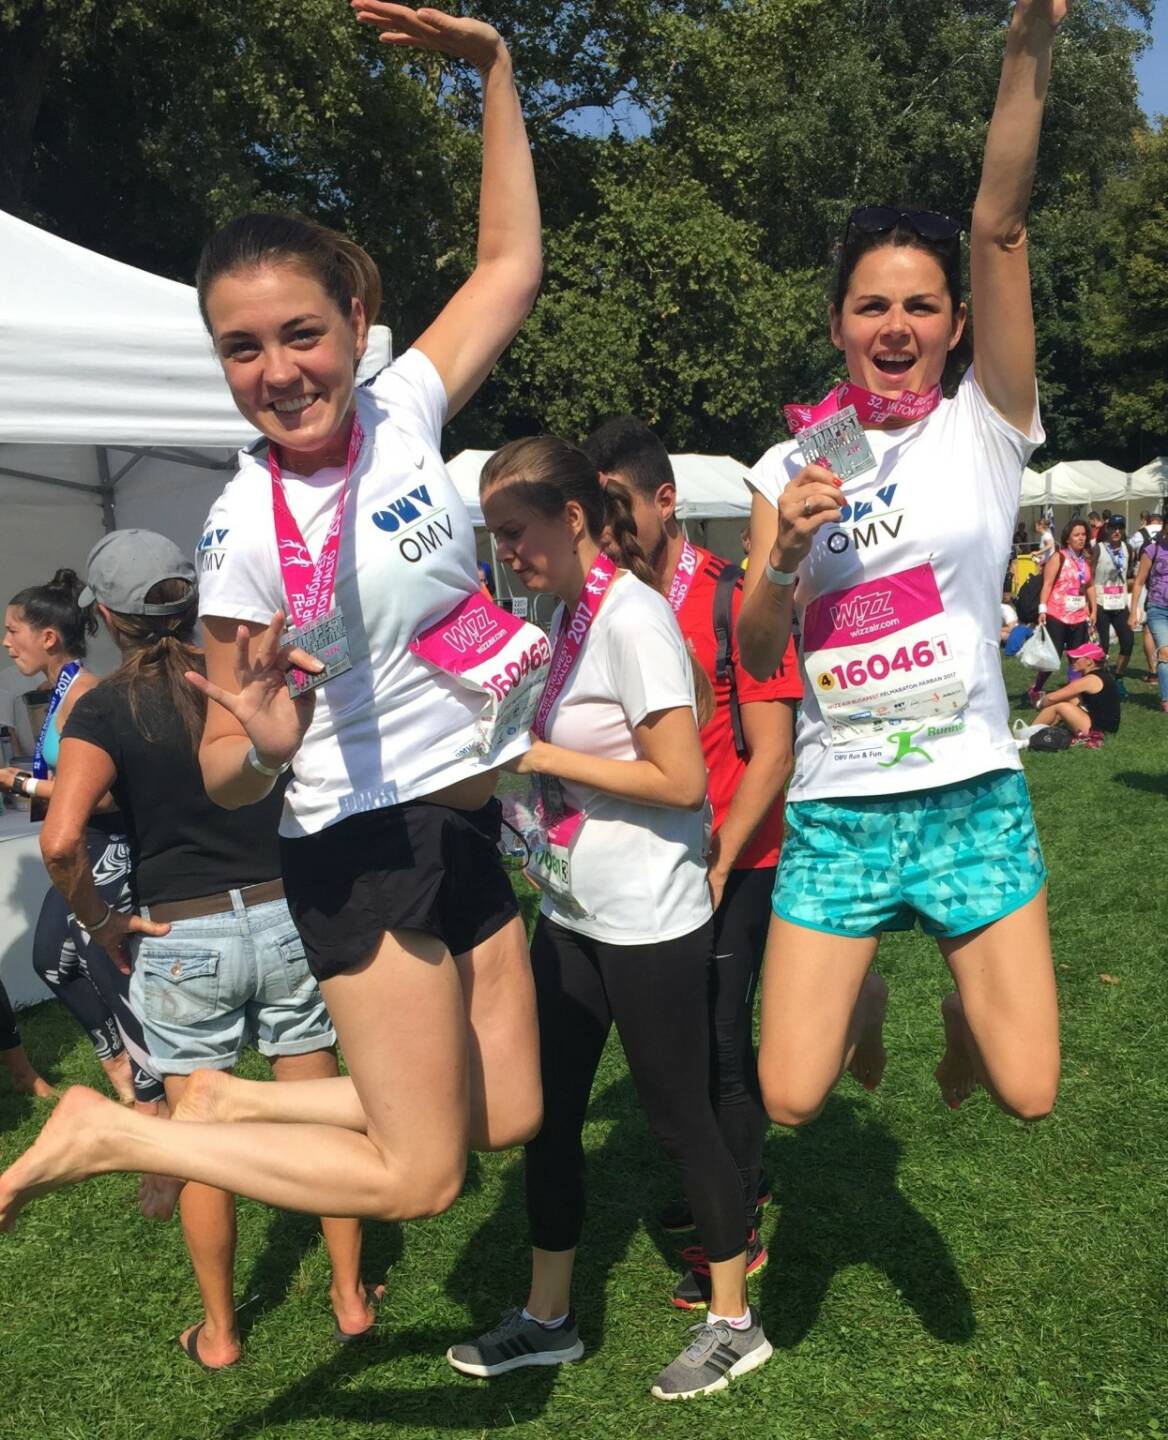 OMV: Still full of energy, these two finishers of the WizzAir Marathon in Budapest, which was sponsored by OMV. A total of 75 OMV employees finished the race last weekend. Congratulations to all of them!